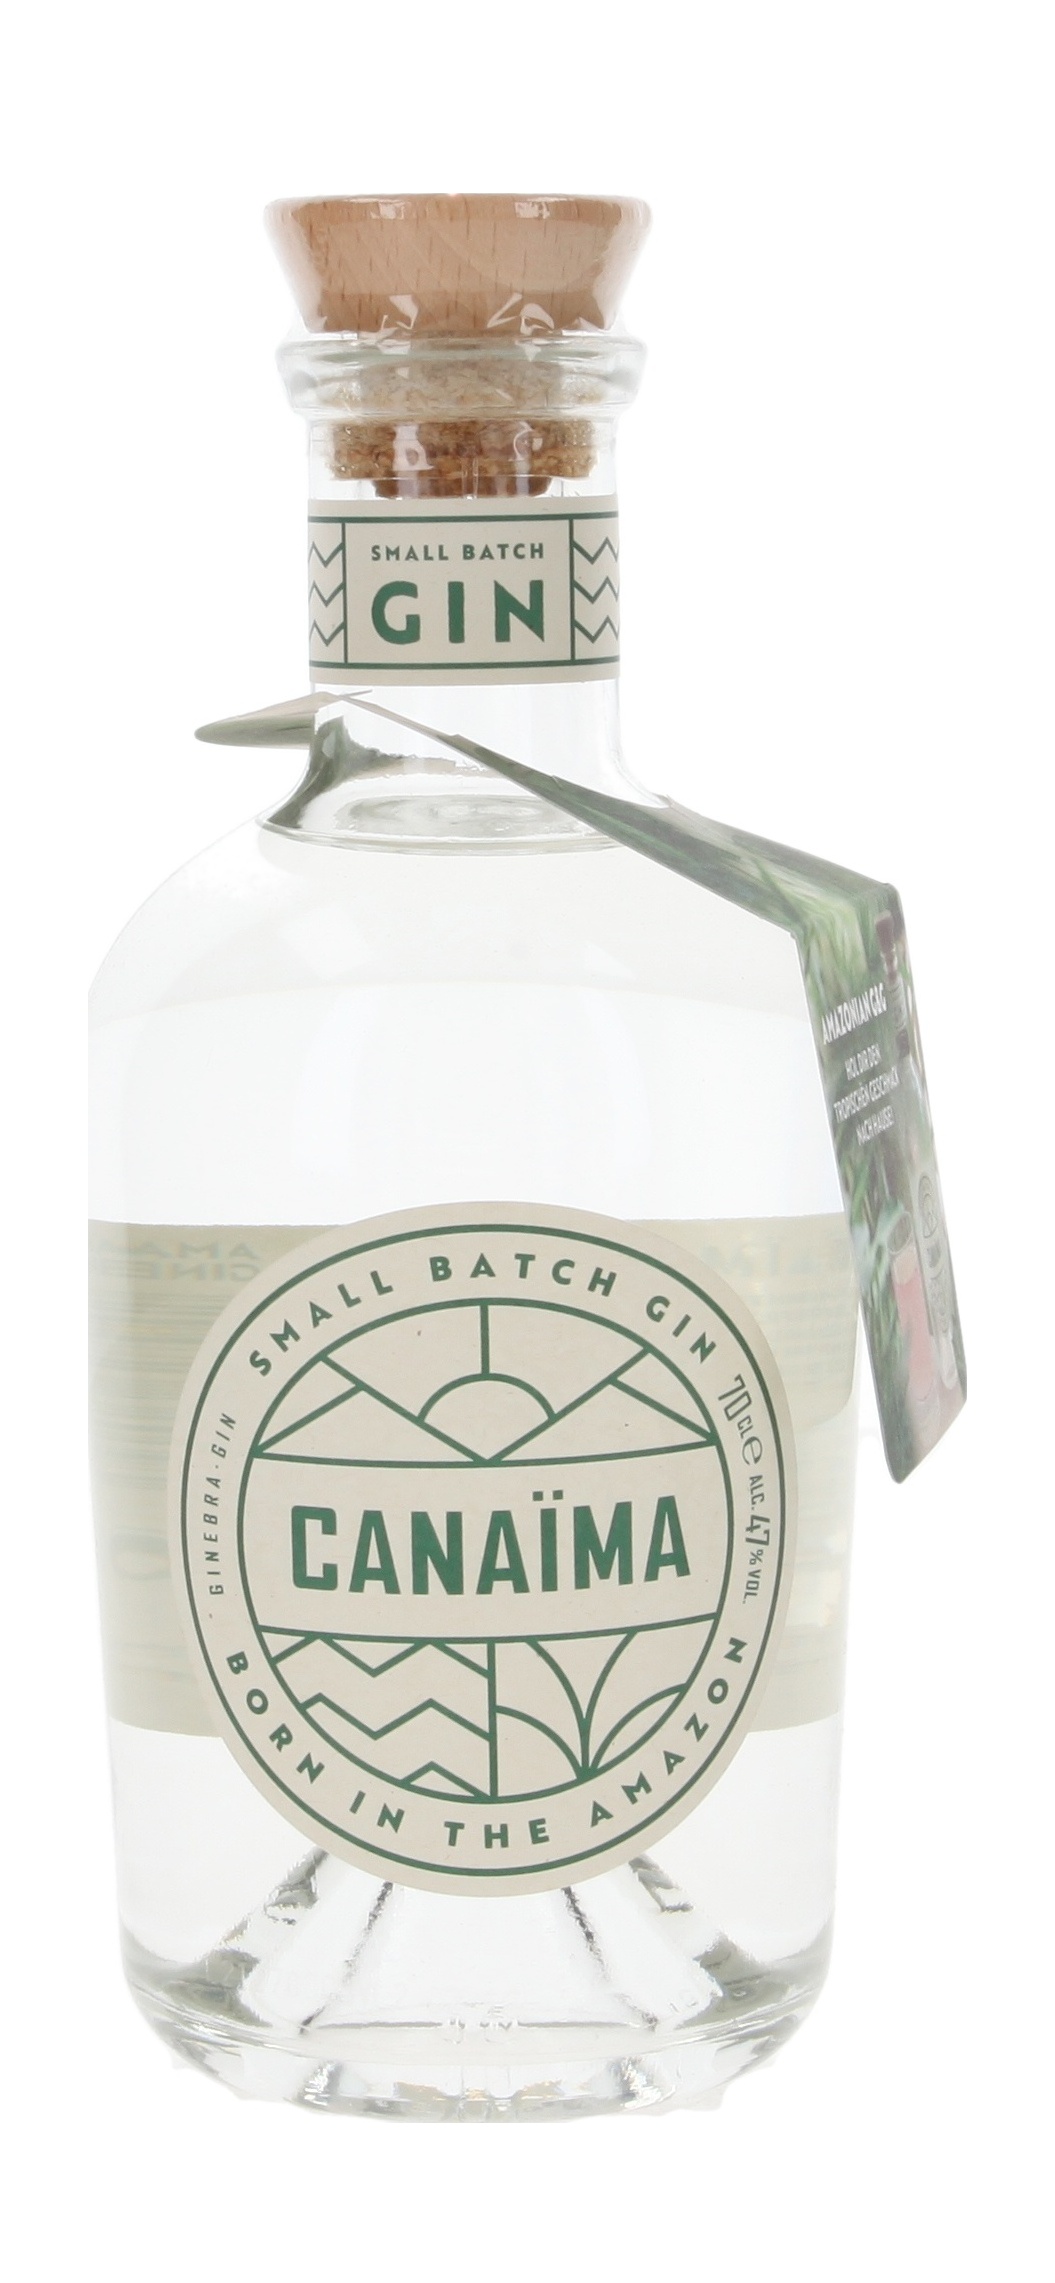 Canaima Small Batch Gin | Whisky.de » To the online store